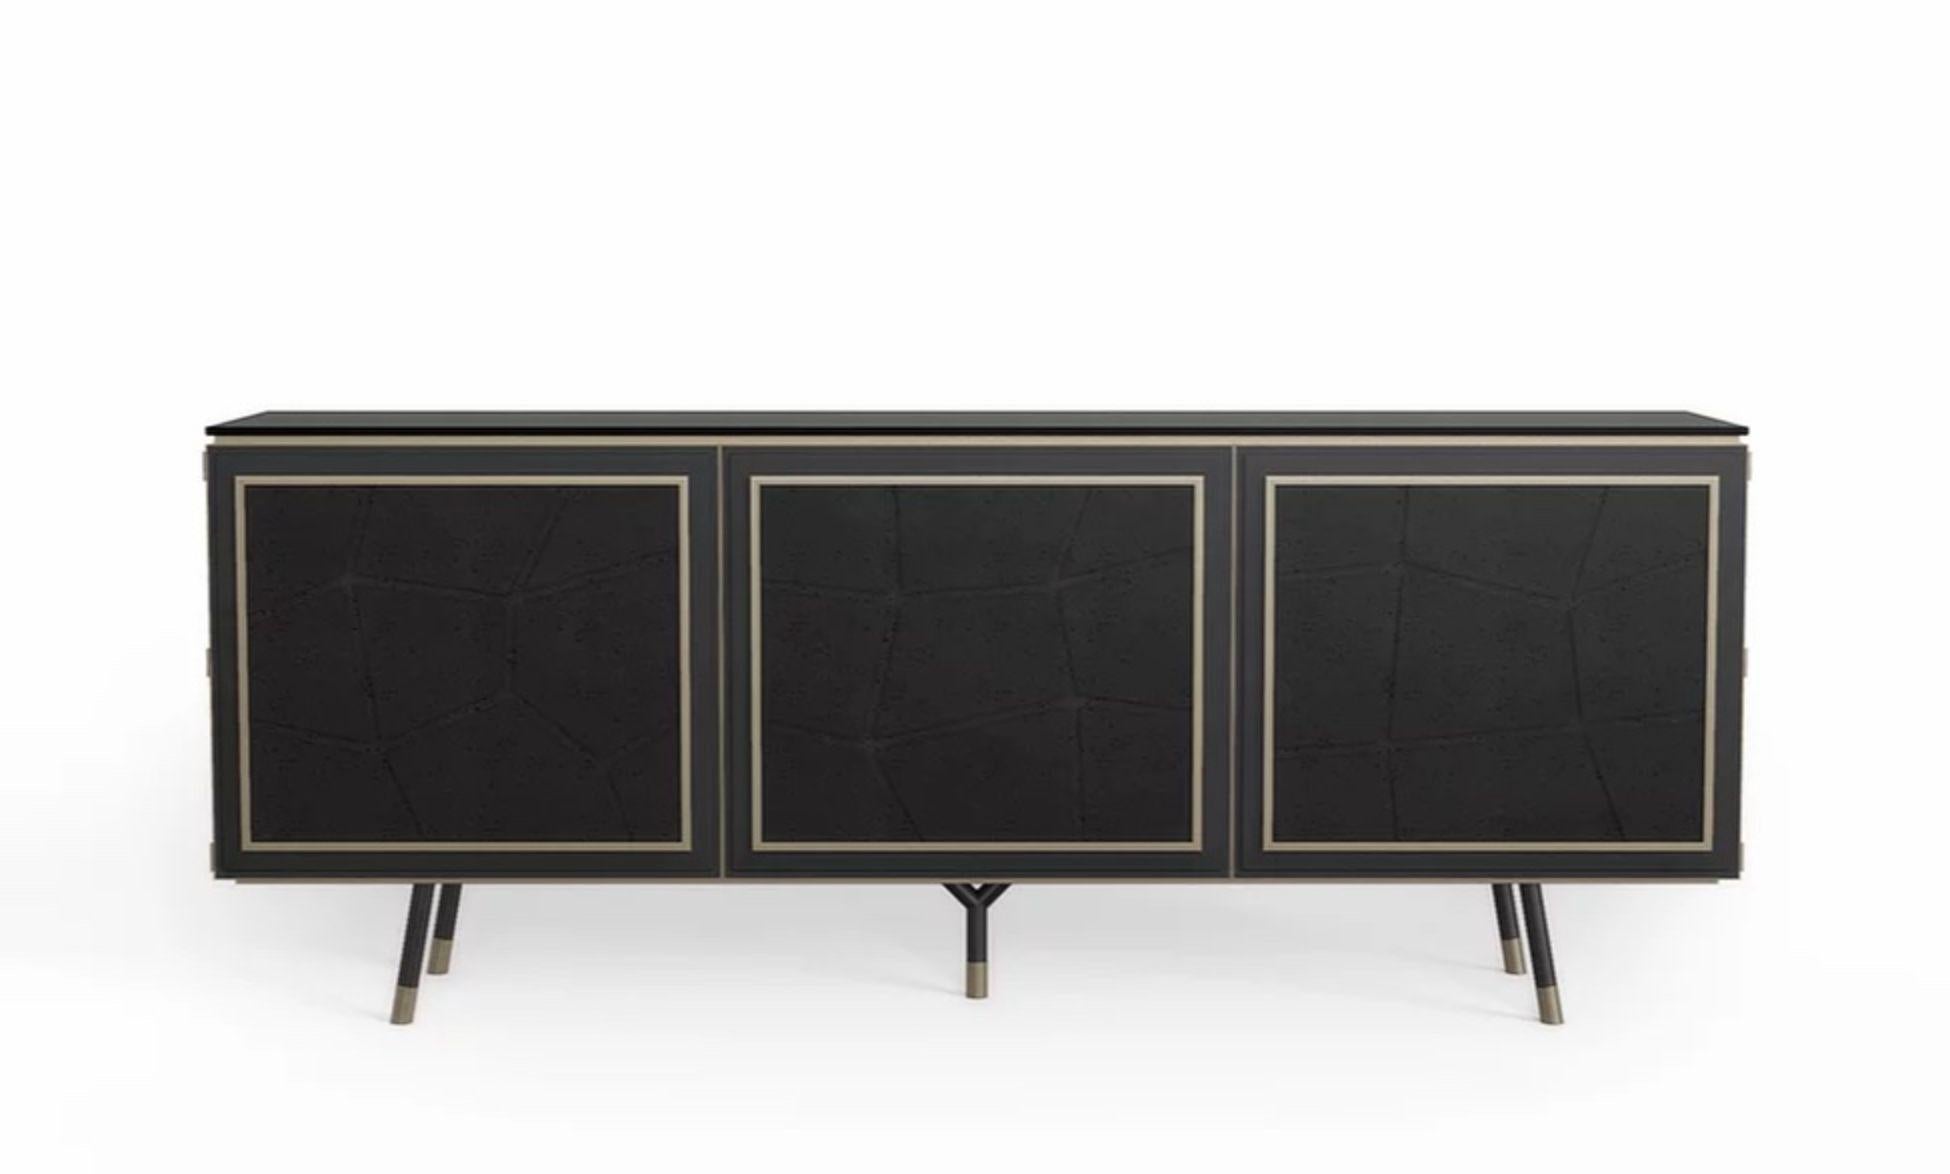 Tortuga cabinet by Marmi Serafini
Materials: Pietra Lavica Nera, bronze brass, leather, wood
Dimensions: 210 x 47 x 83 cm

Pietra Lavica is granite which recalls the earth and its different formations. That is why, this peculiar feature is